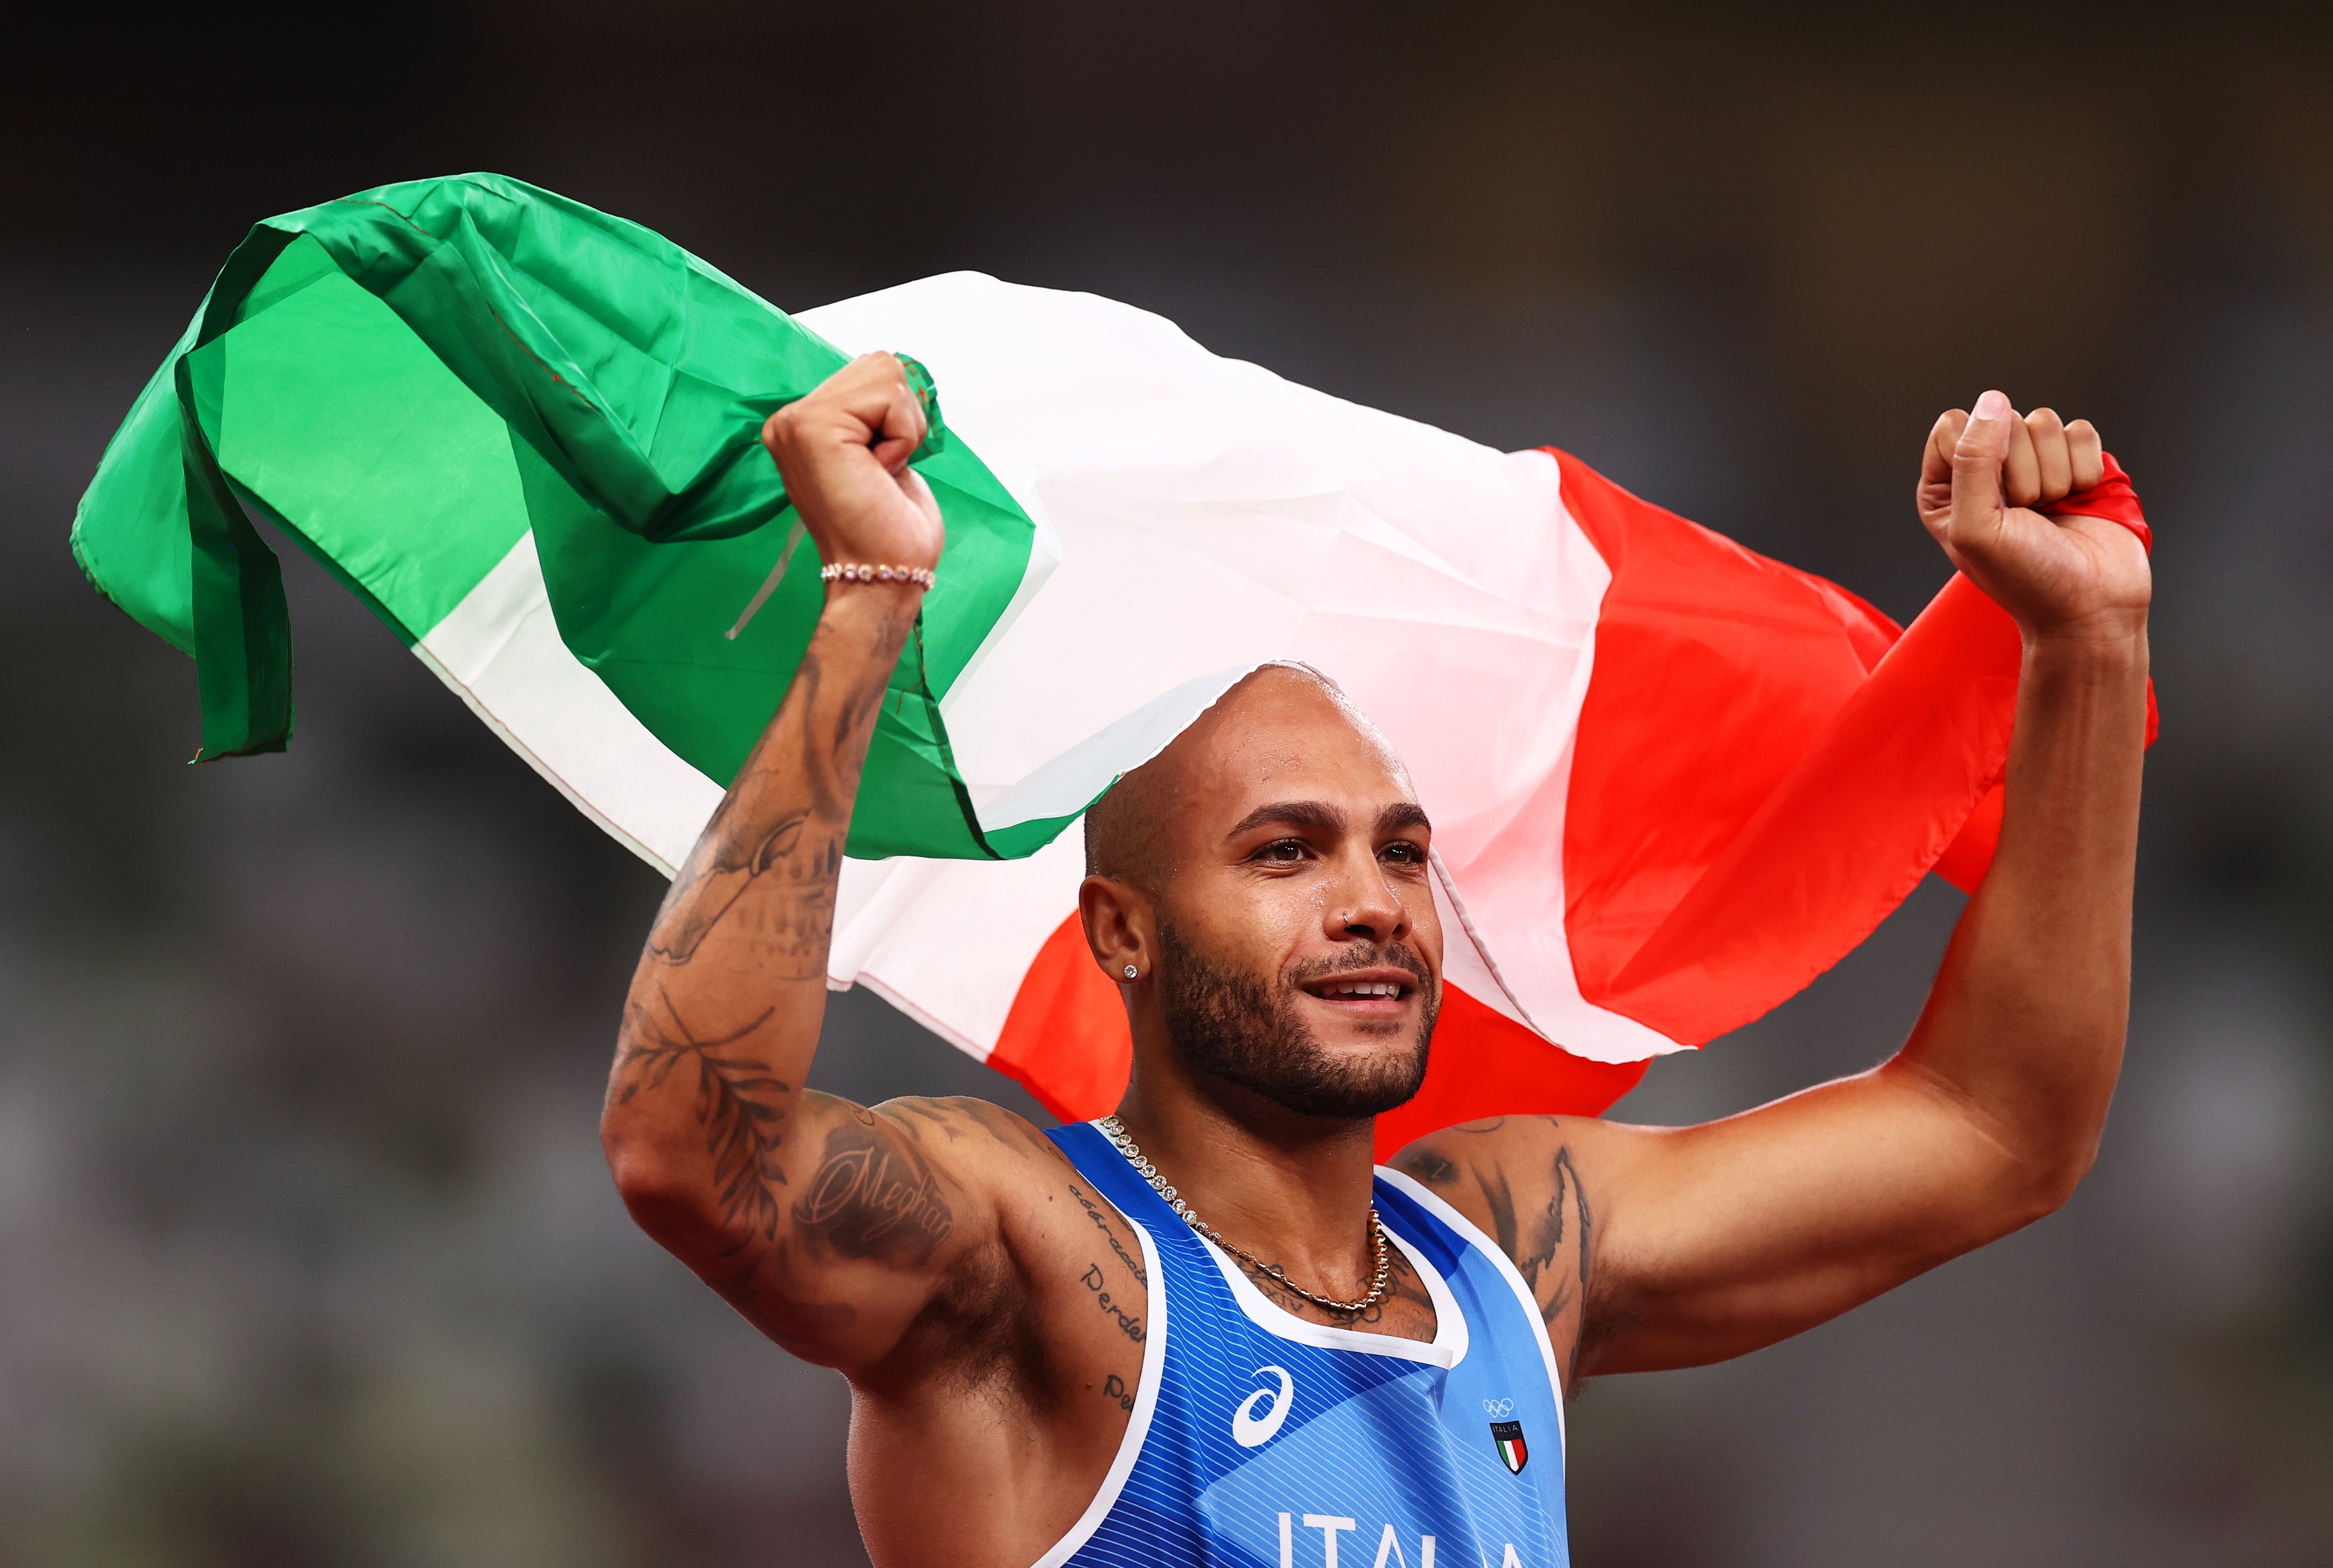 Italys Lamont Jacobs wins gold in Olympics 100m dash